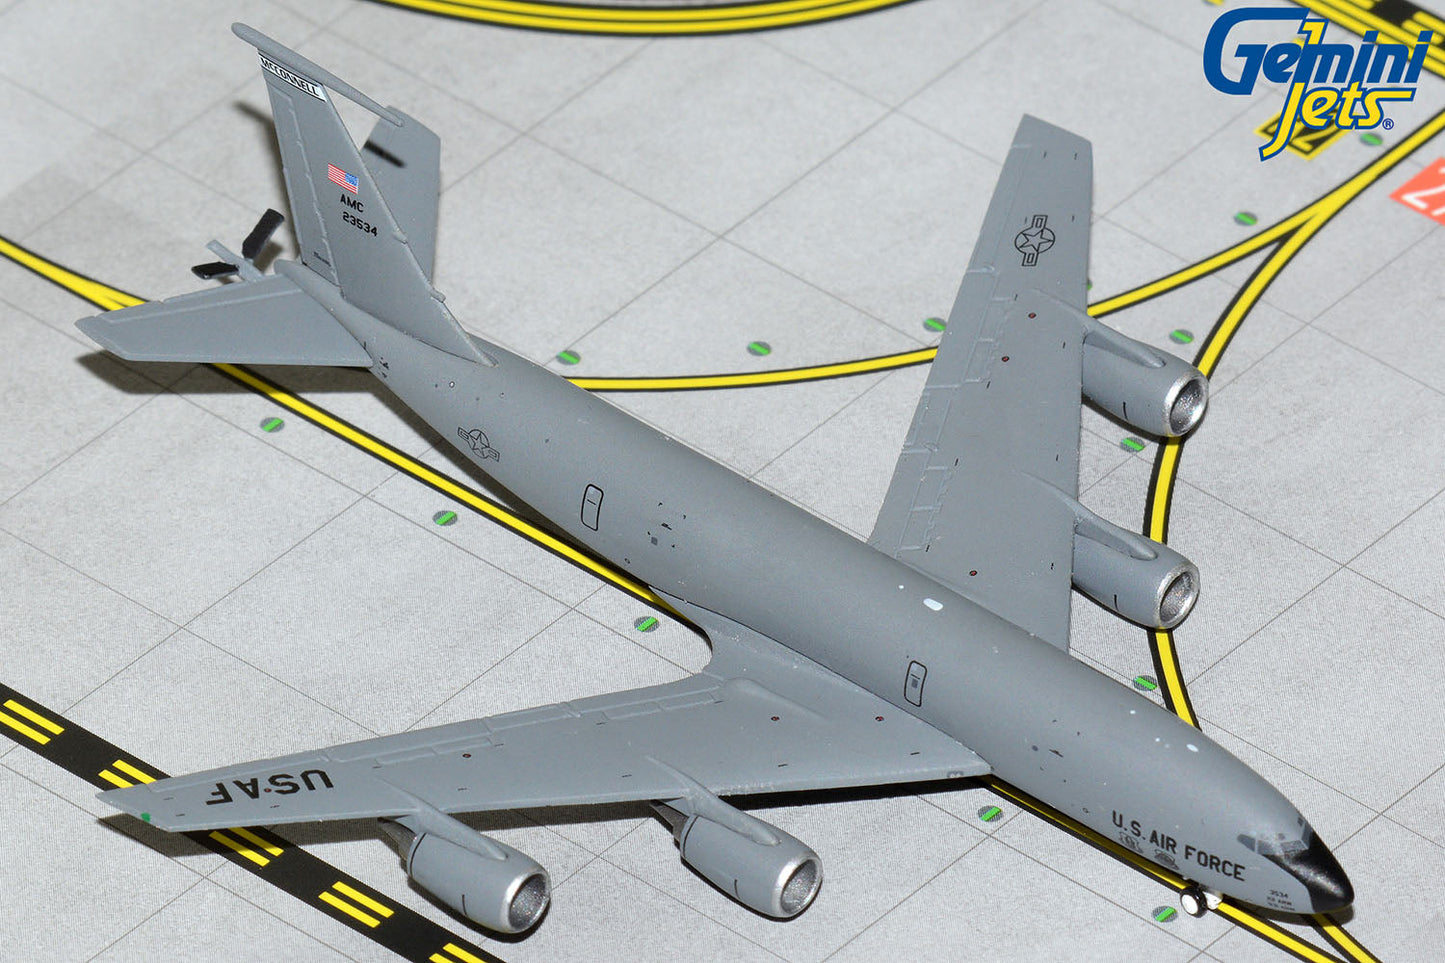 1/400 U.S. Air Force KC-135RT "McConnell Air Force Base" Gemini Jets GMUSA120